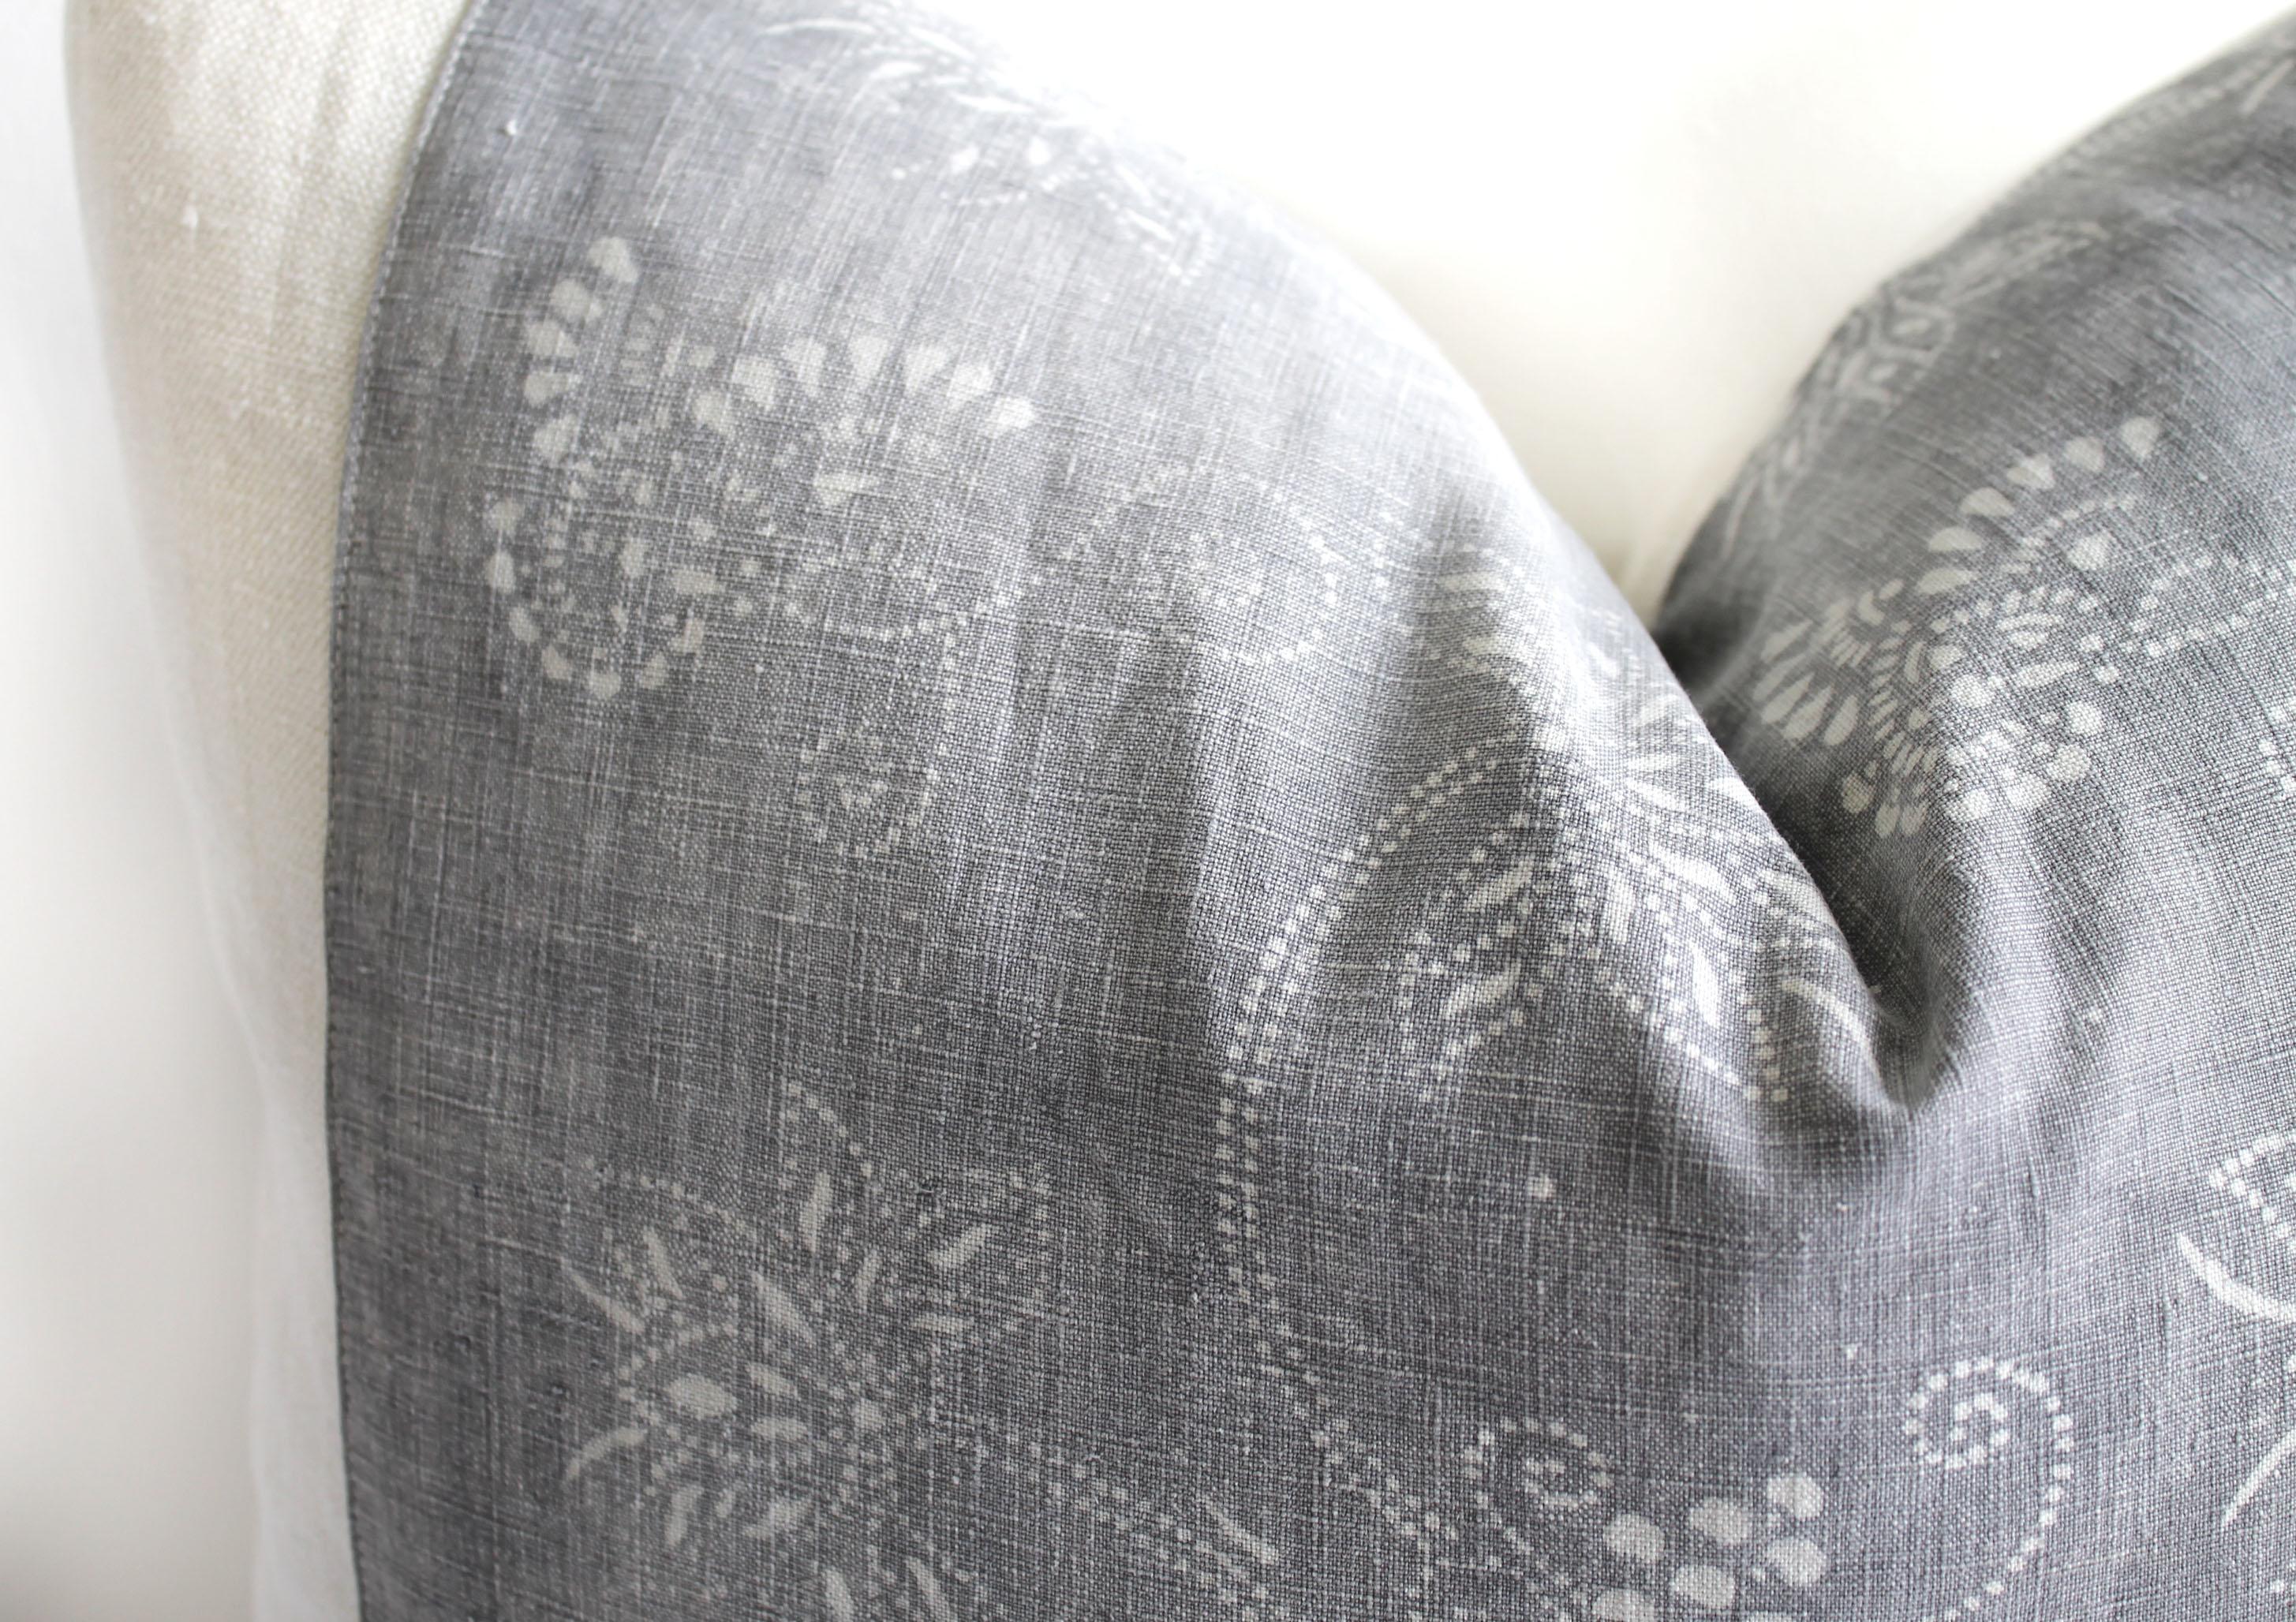 This beautiful pillow features a vintage textile face in a faded gray and soft white pattern, blocked with a light sand European linen, and backed with the same linen.
Our pillows are constructed with vintage one of a kind textiles from around the